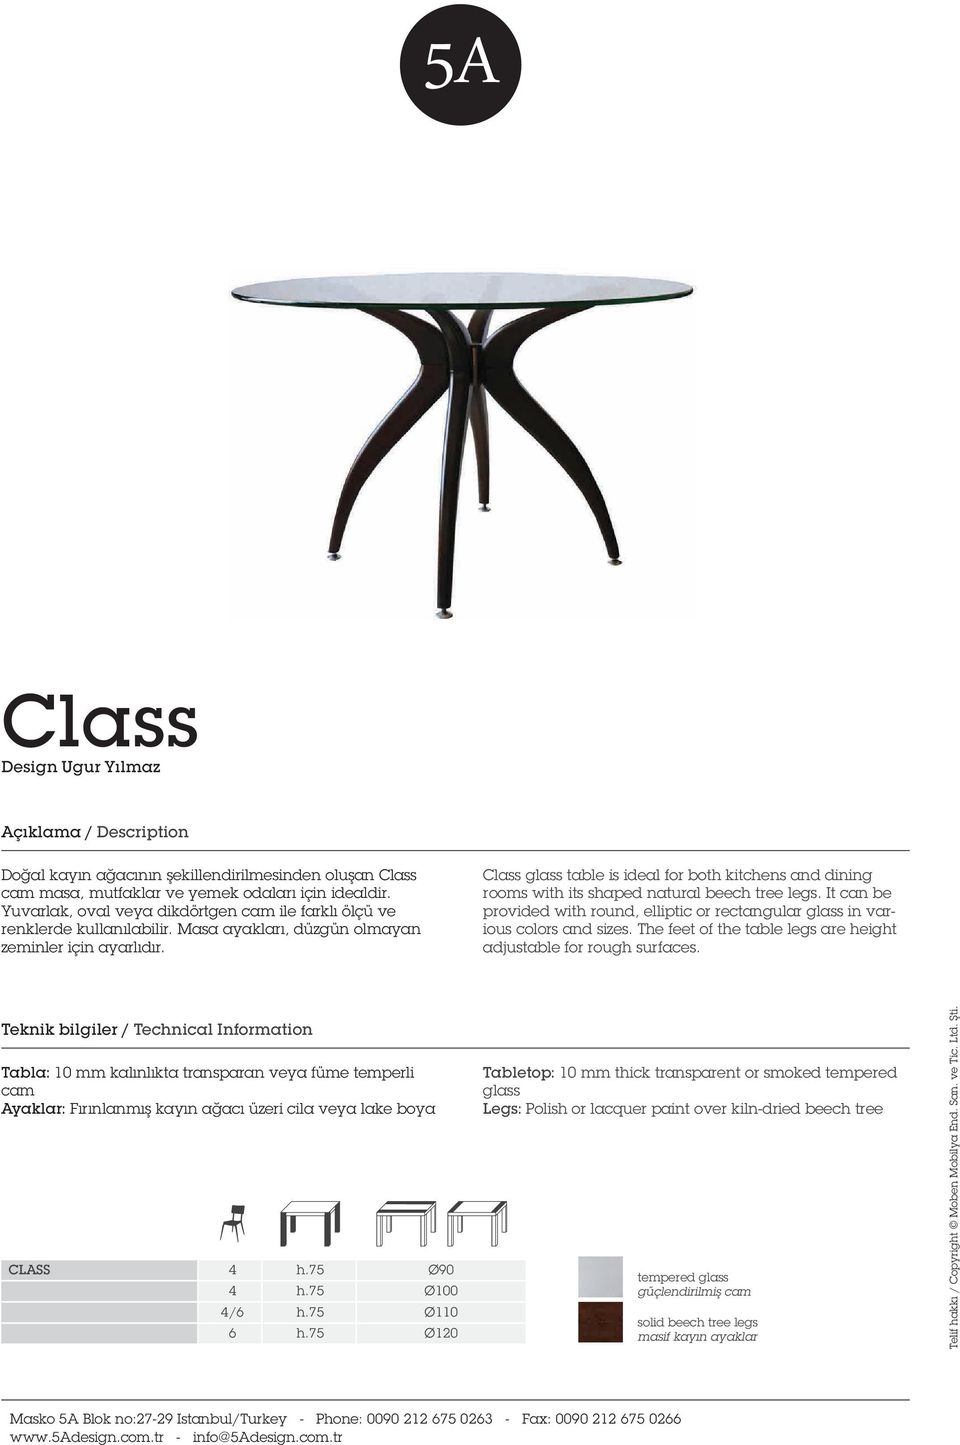 Class glass table is ideal for both kitchens and dining rooms with its shaped natural beech tree legs. It can be provided with round, elliptic or rectangular glass in various colors and sizes.